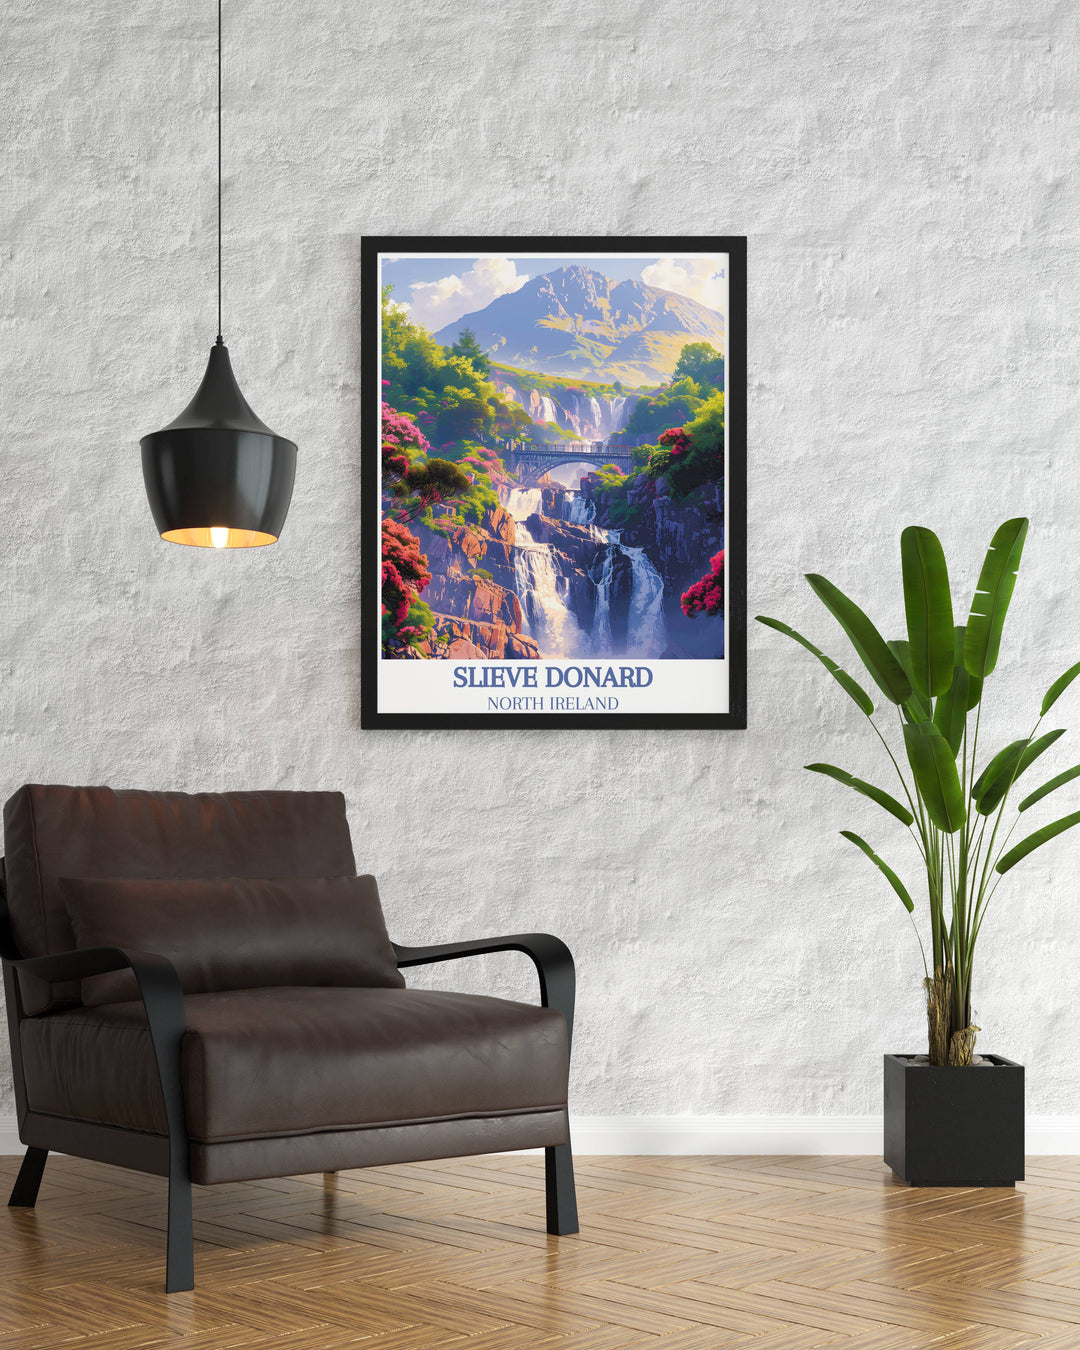 Elegant framed art of Slieve Donard, capturing the natural grandeur of Northern Ireland, perfect for contemporary decor with a touch of tradition.